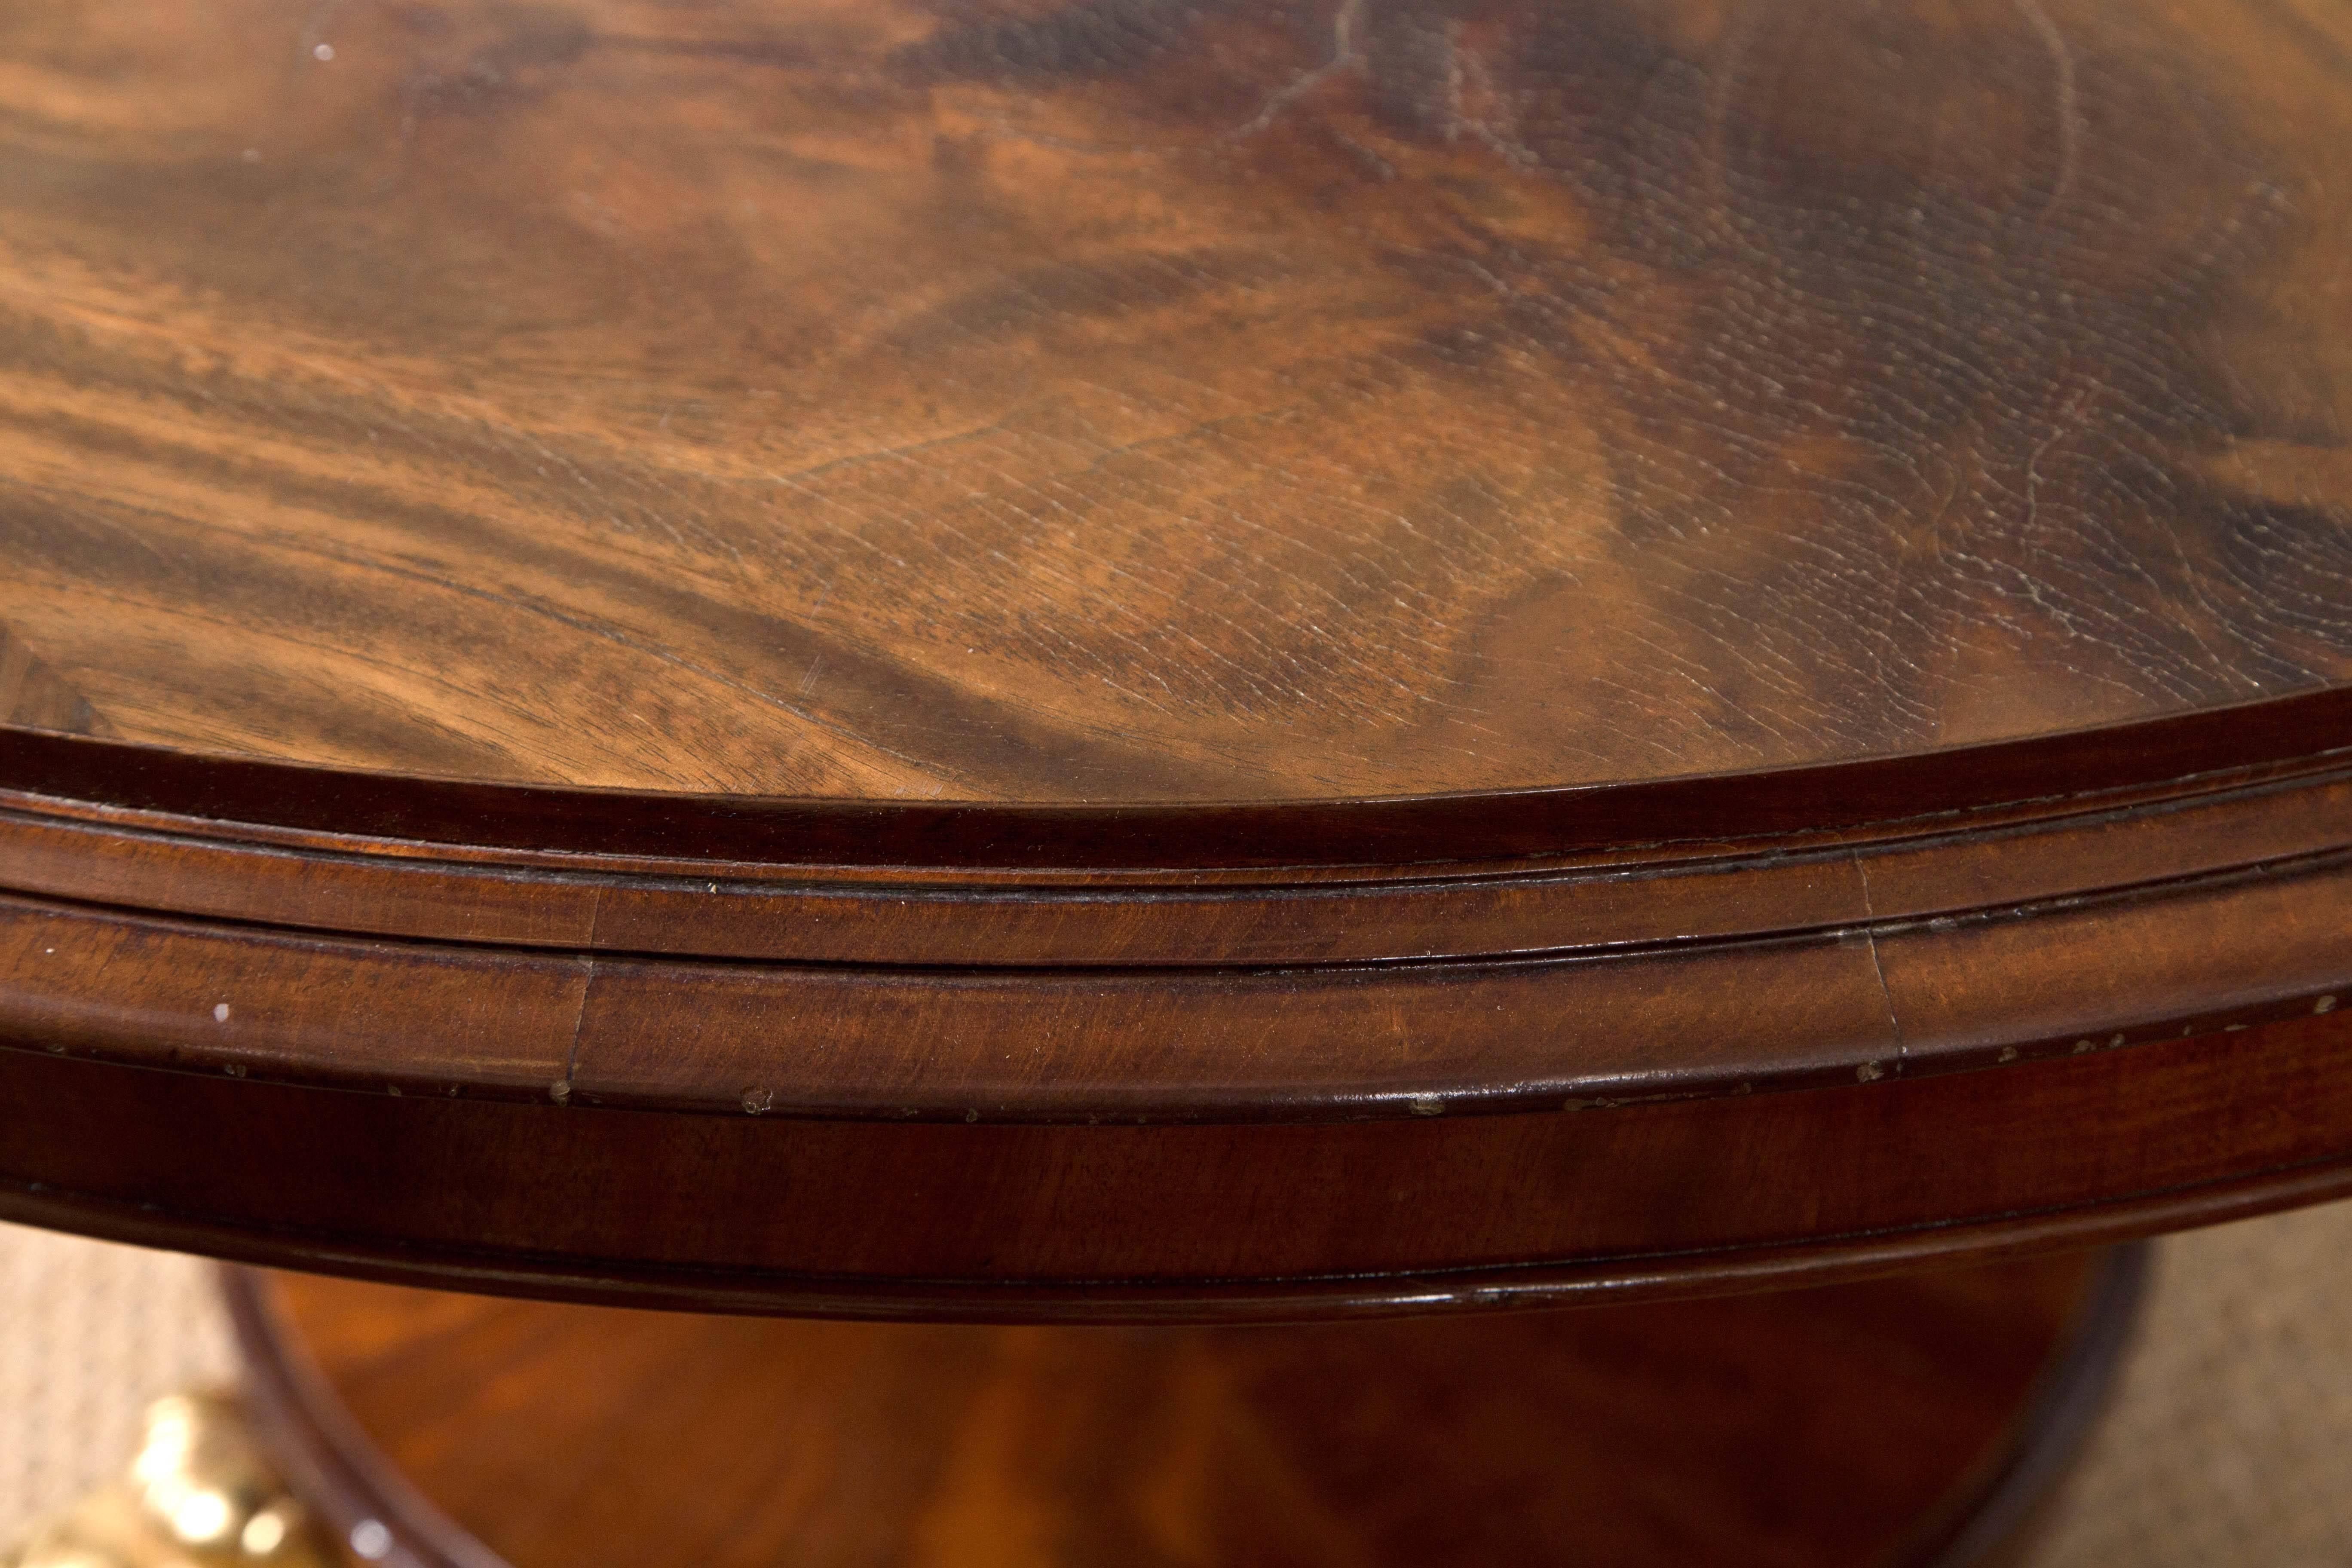 This tilt top center or breakfast table, has four gilt scroll feet below the base. Octagonal pedestal with black and gilt decoration. The top in need of refinishing. Molded edge of the top makes the surface area 48 inches in diameter.